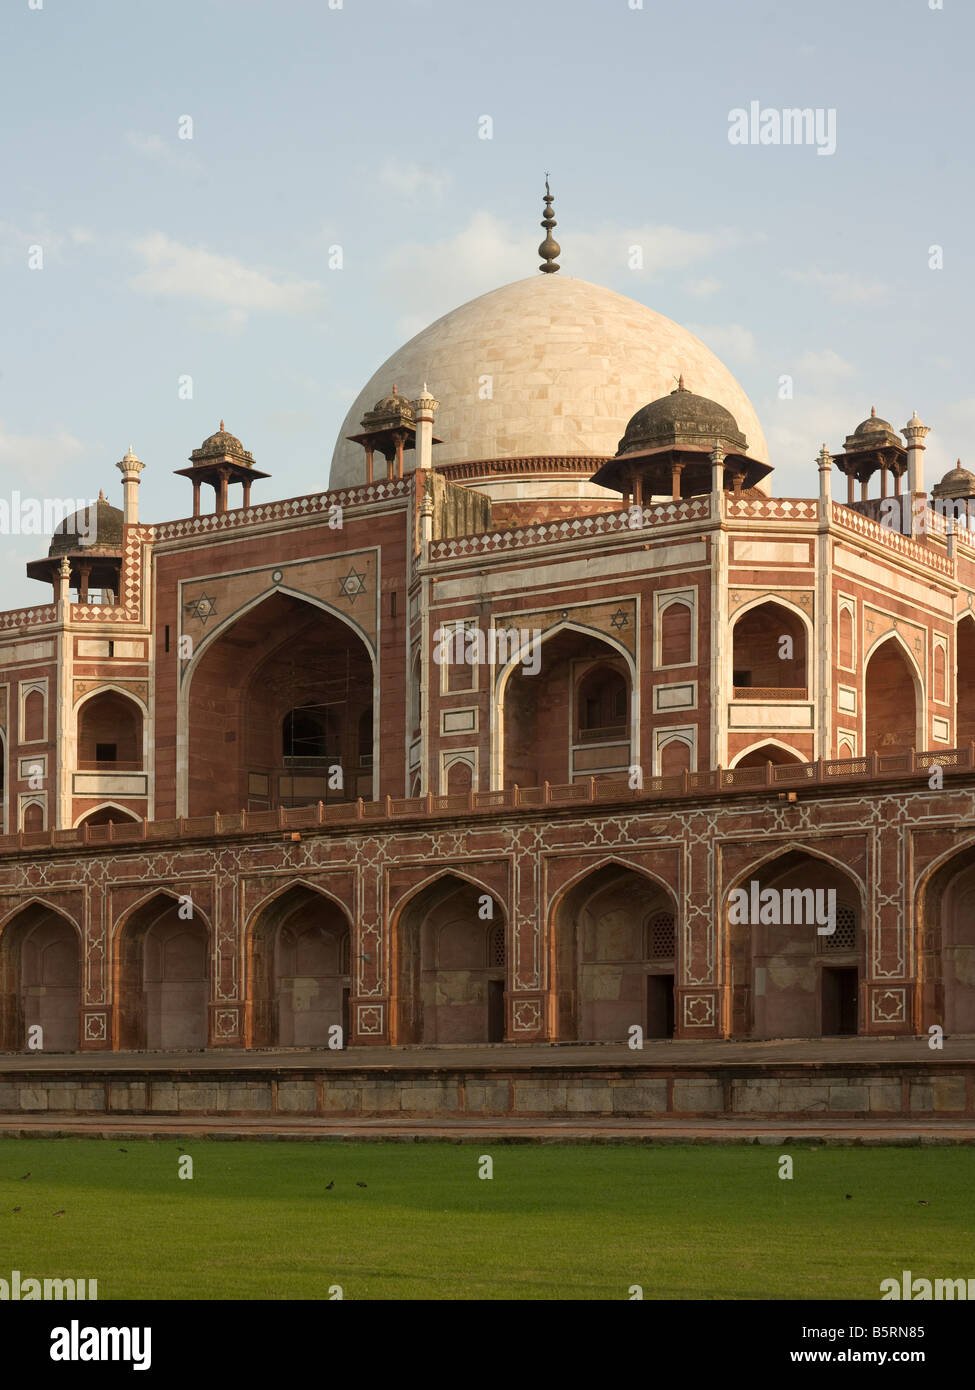 Humayuns Tomb Delhi India Mausoleum of second Mughal Emperor central section with dome Stock Photo